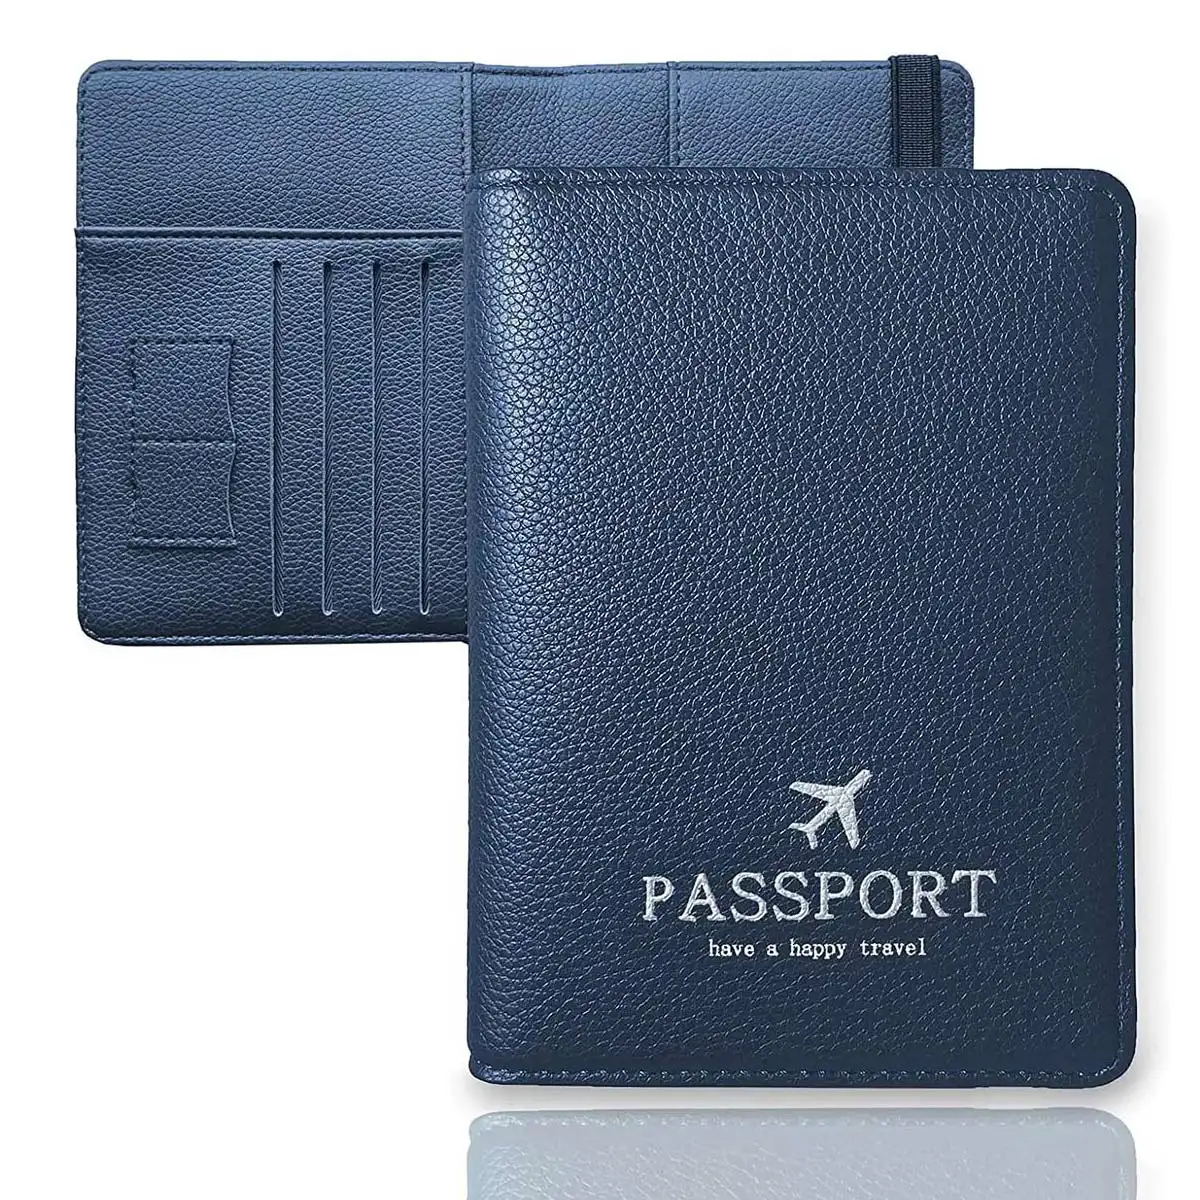 Passport Wallet Travel Accessories Faux RFID Blocking PU Leather Sublimation Passport Covers Passport Holder With Logo Cheap